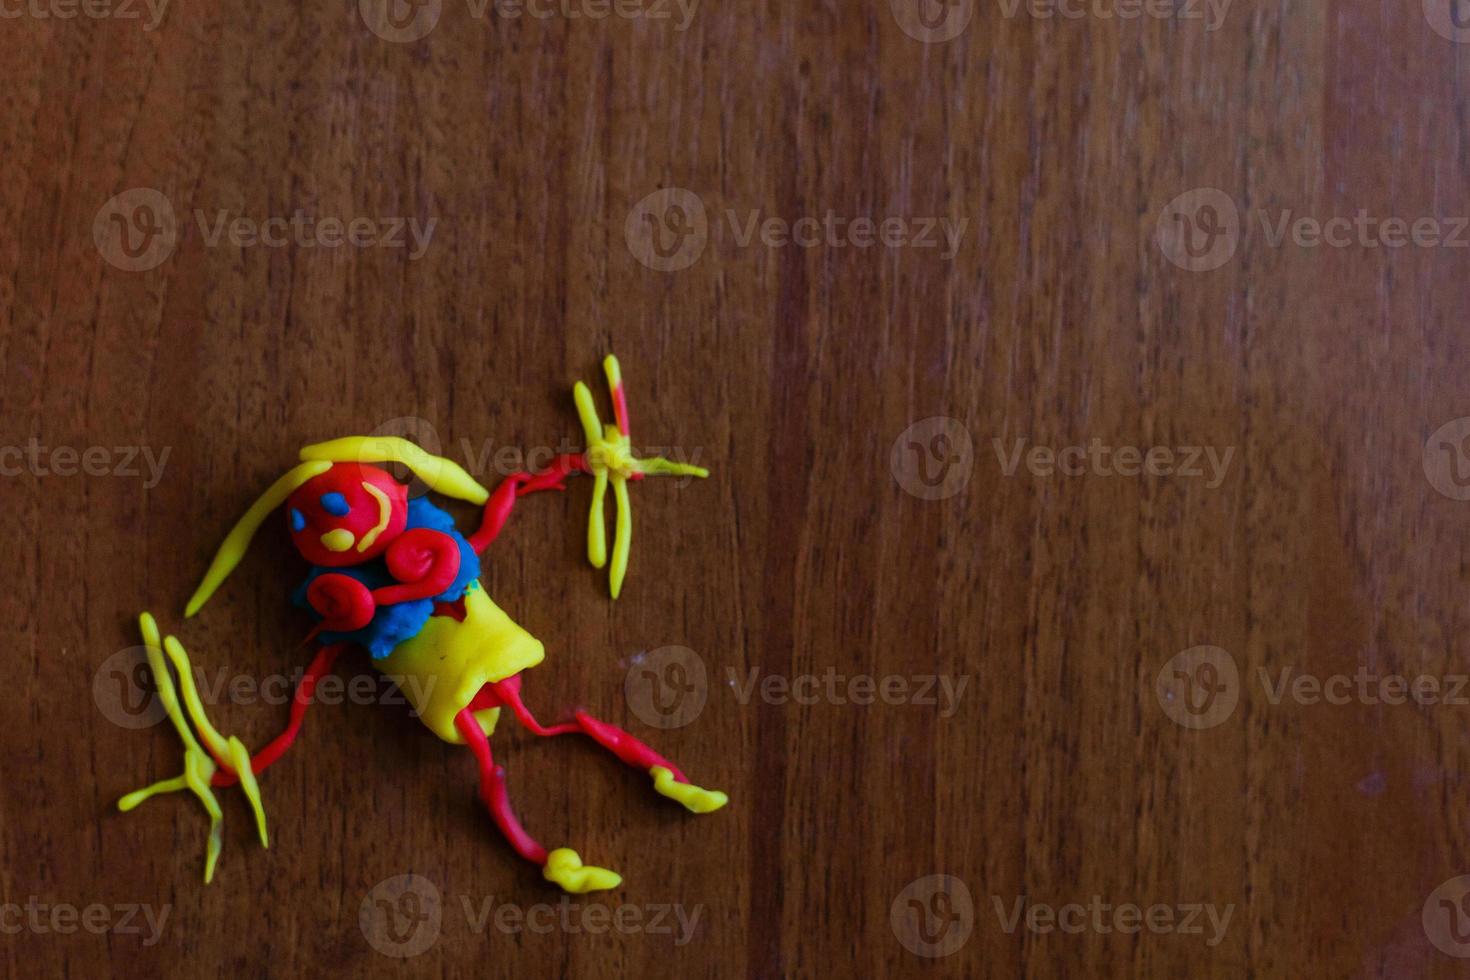 Doll from colorful clay dough plasticine made by child photo